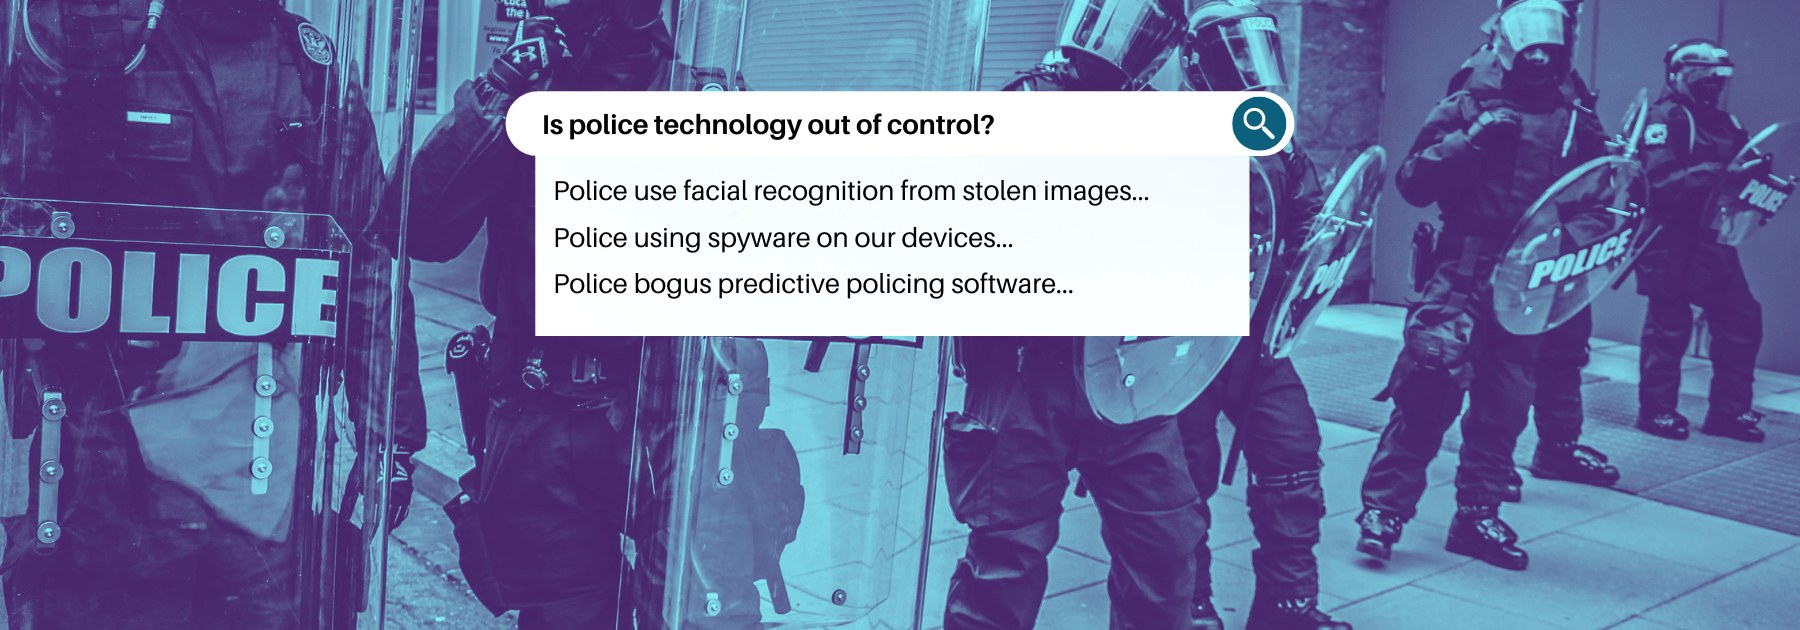 is police technology out of control? Yes